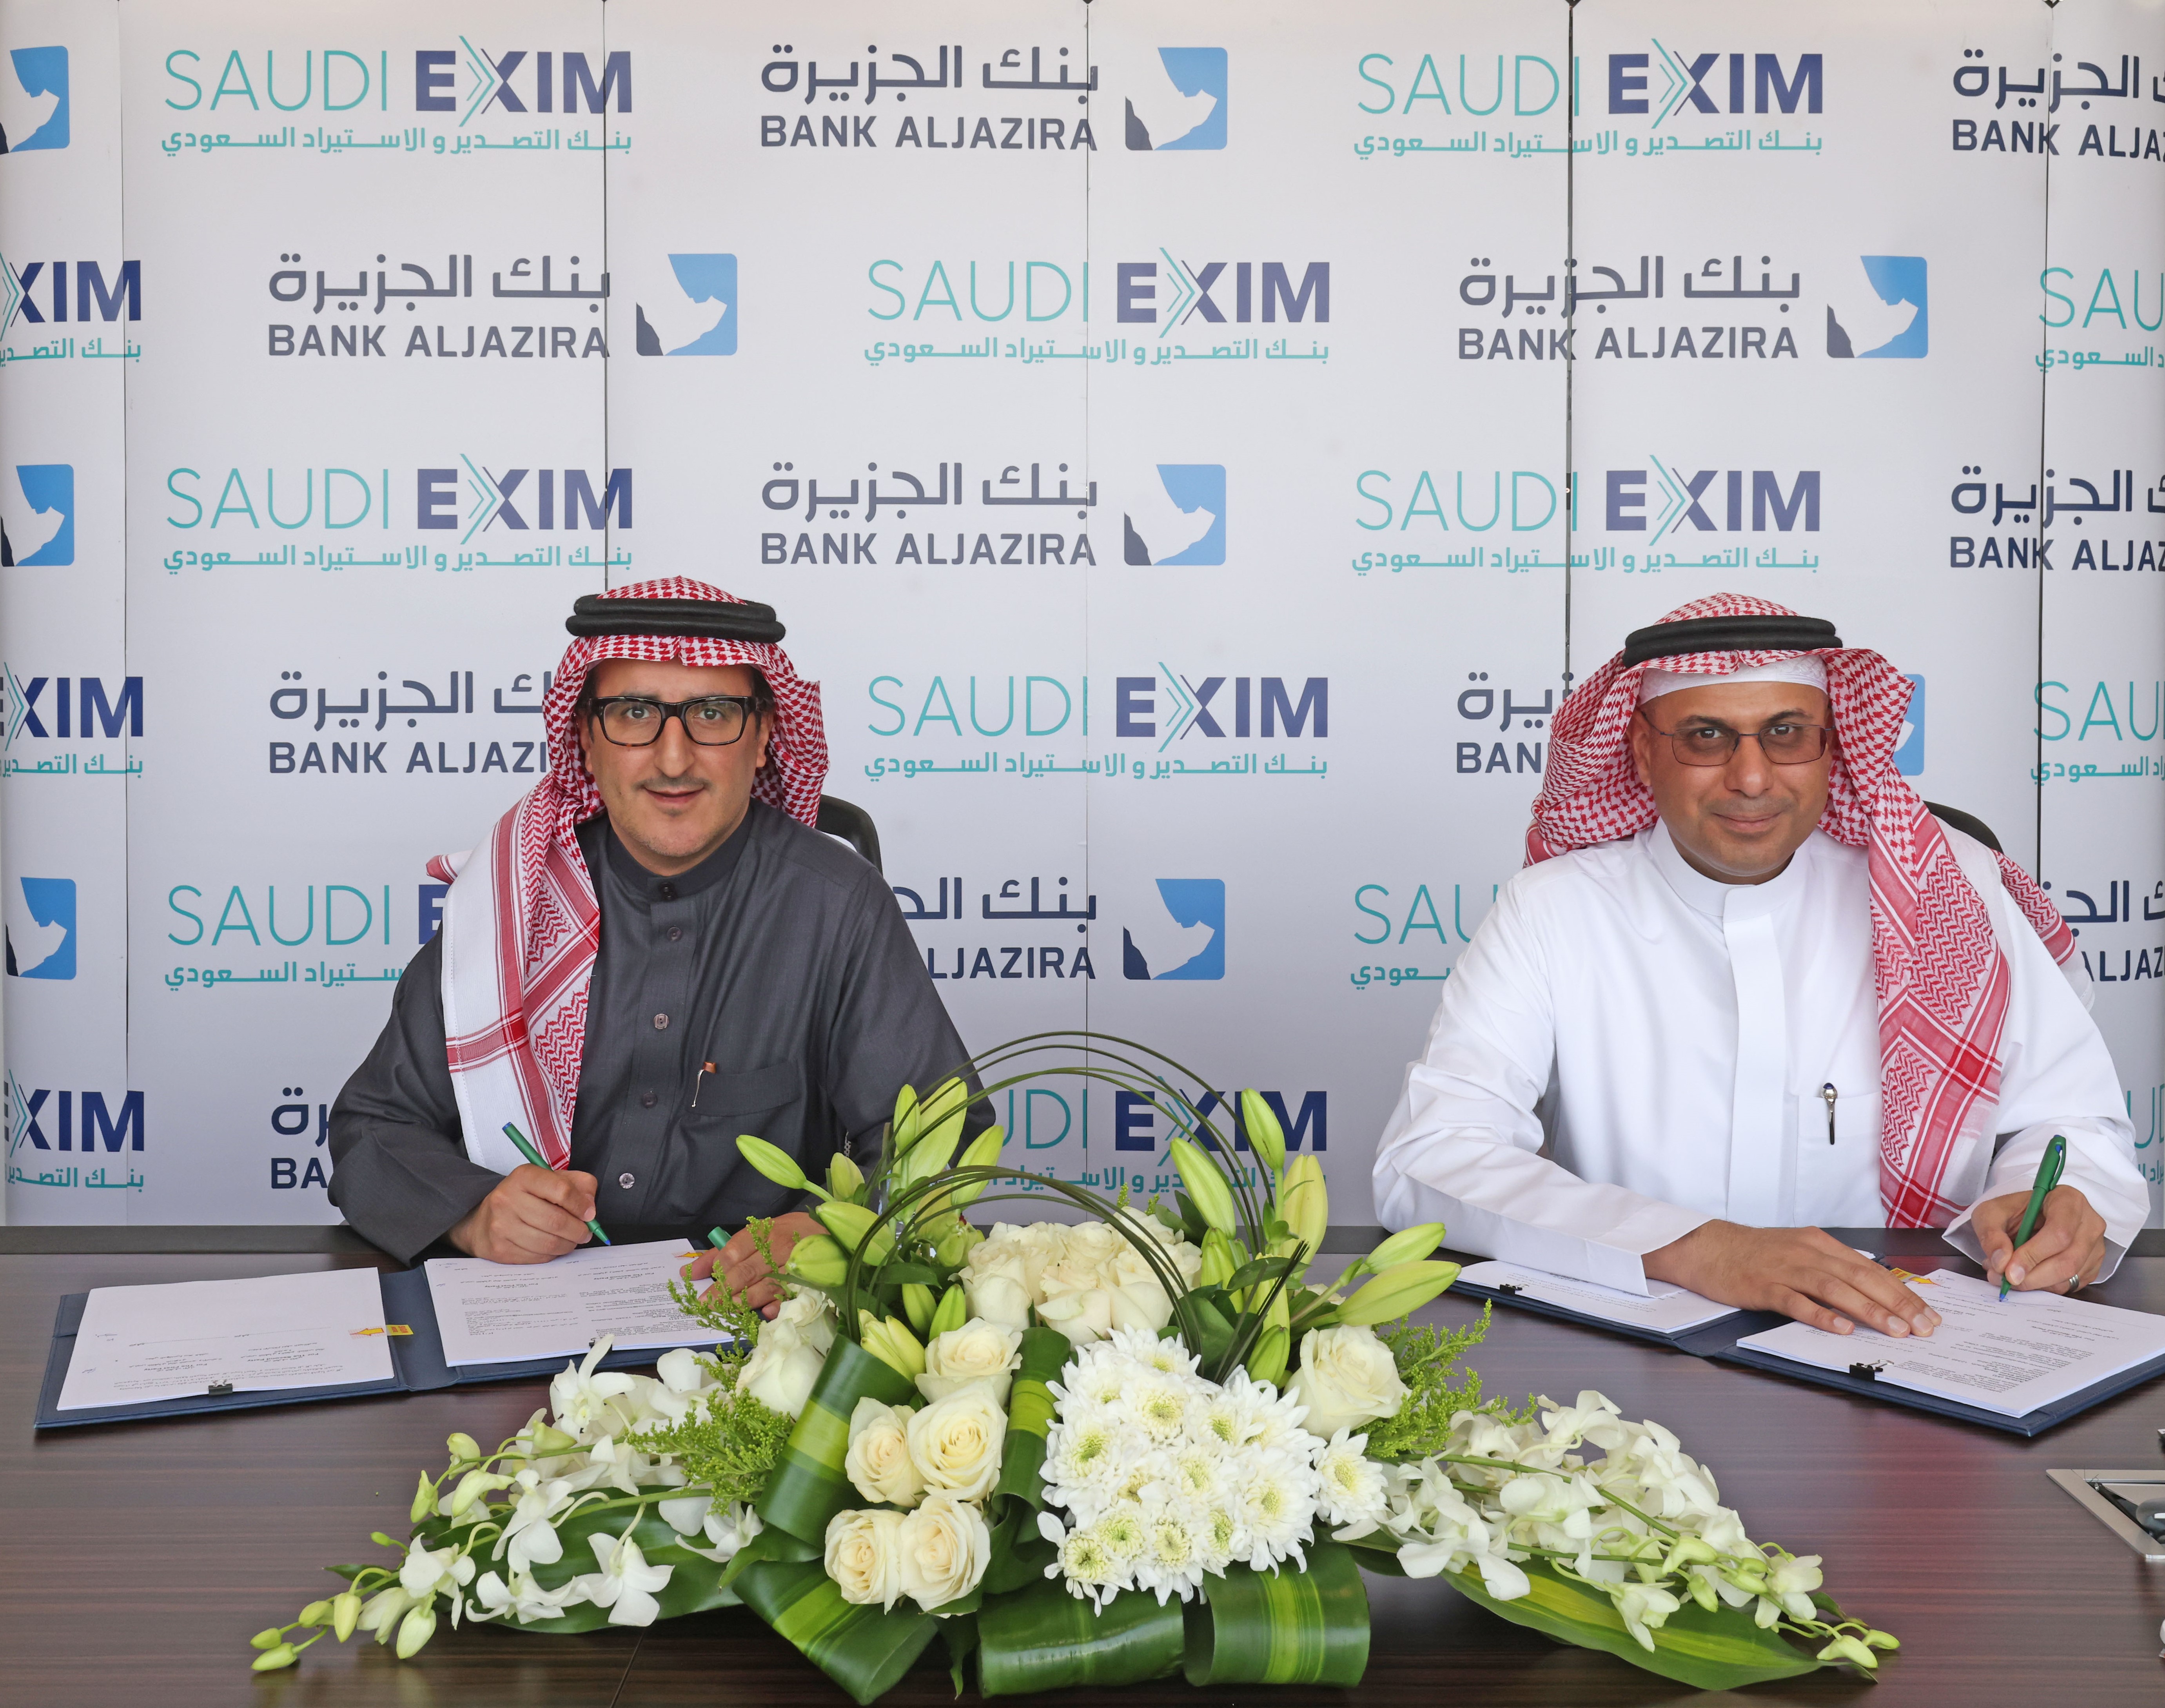 BAJ, Saudi EXIM Sign Cooperative Agreement & Collateralized Credit Insurance Policy 